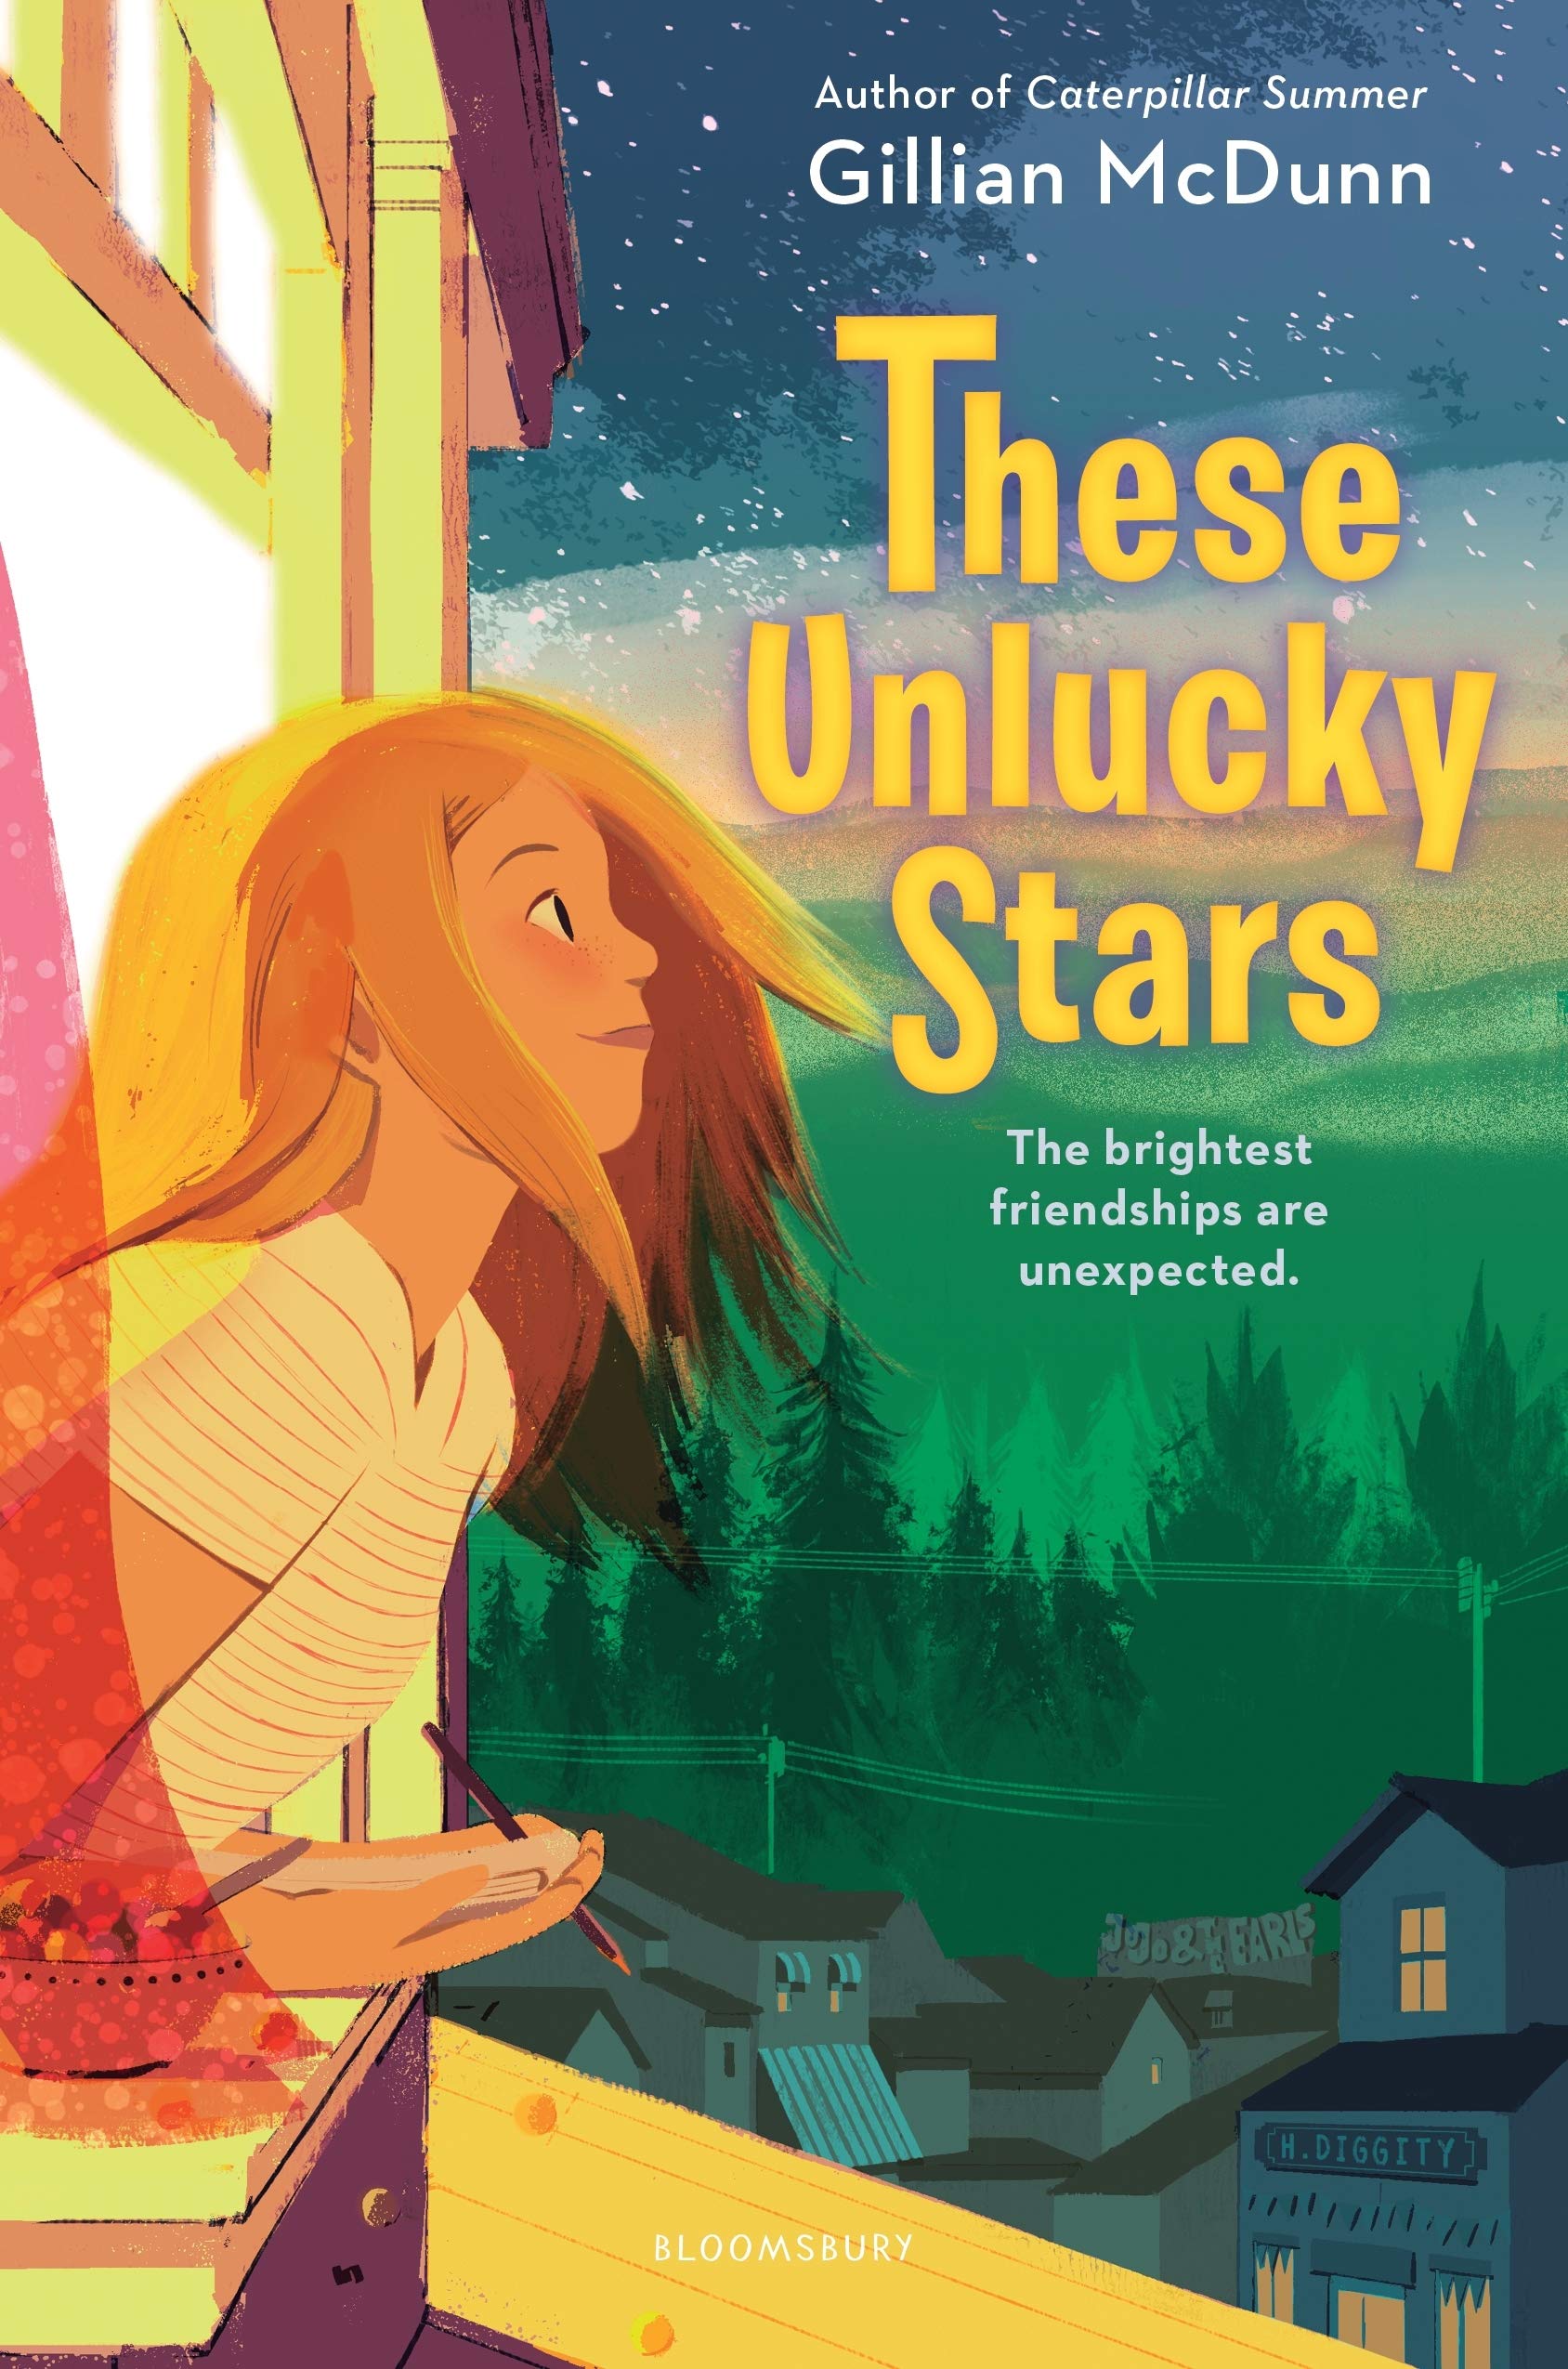 Image for "These Unlucky Stars"